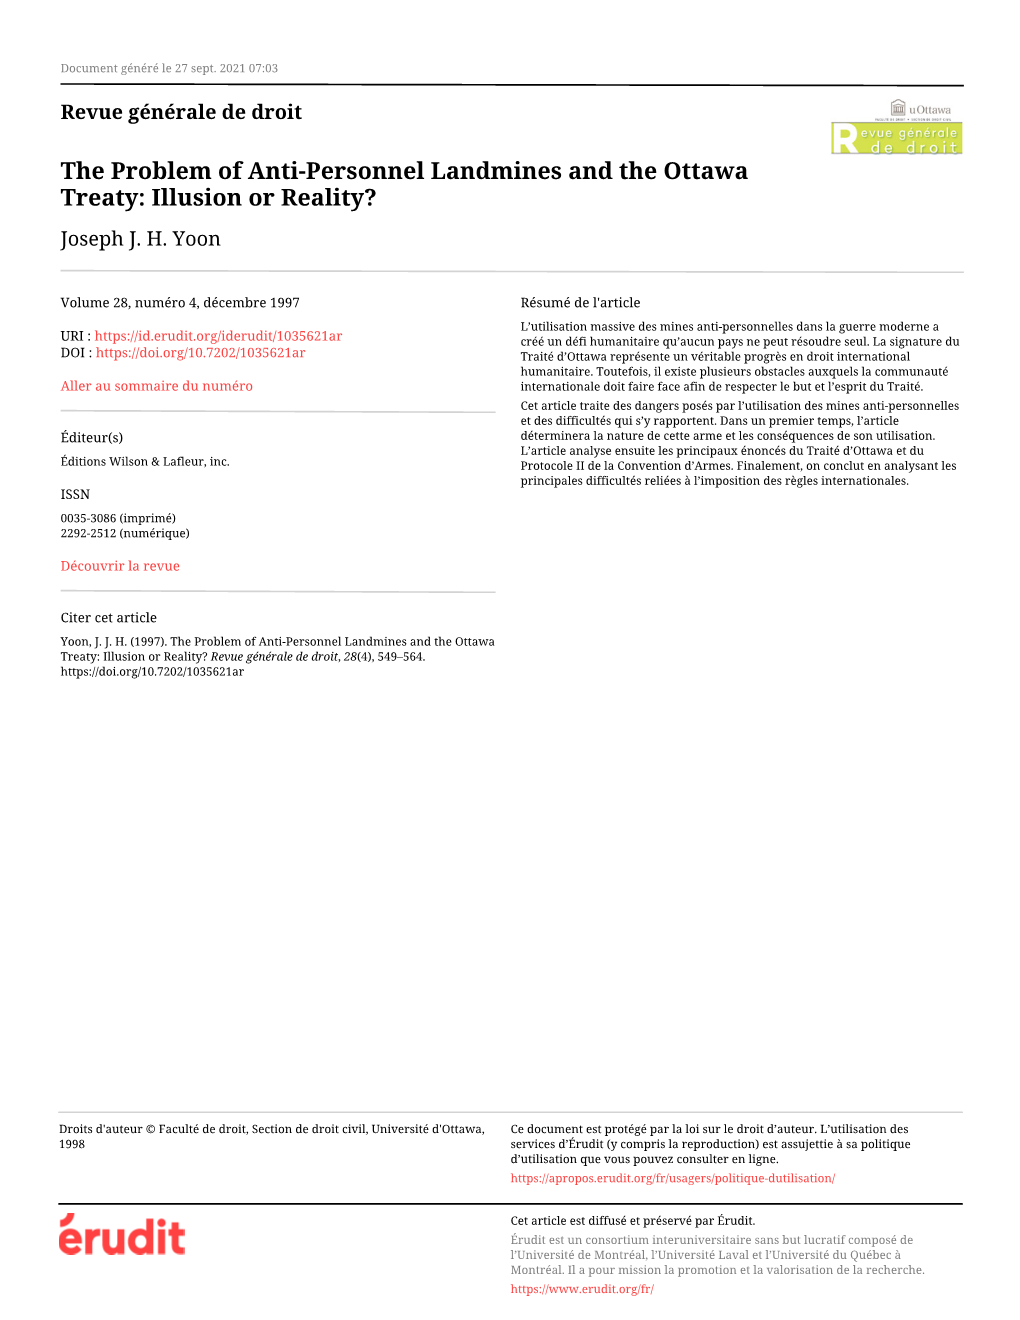 The Problem of Anti-Personnel Landmines and the Ottawa Treaty: Illusion Or Reality? Joseph J